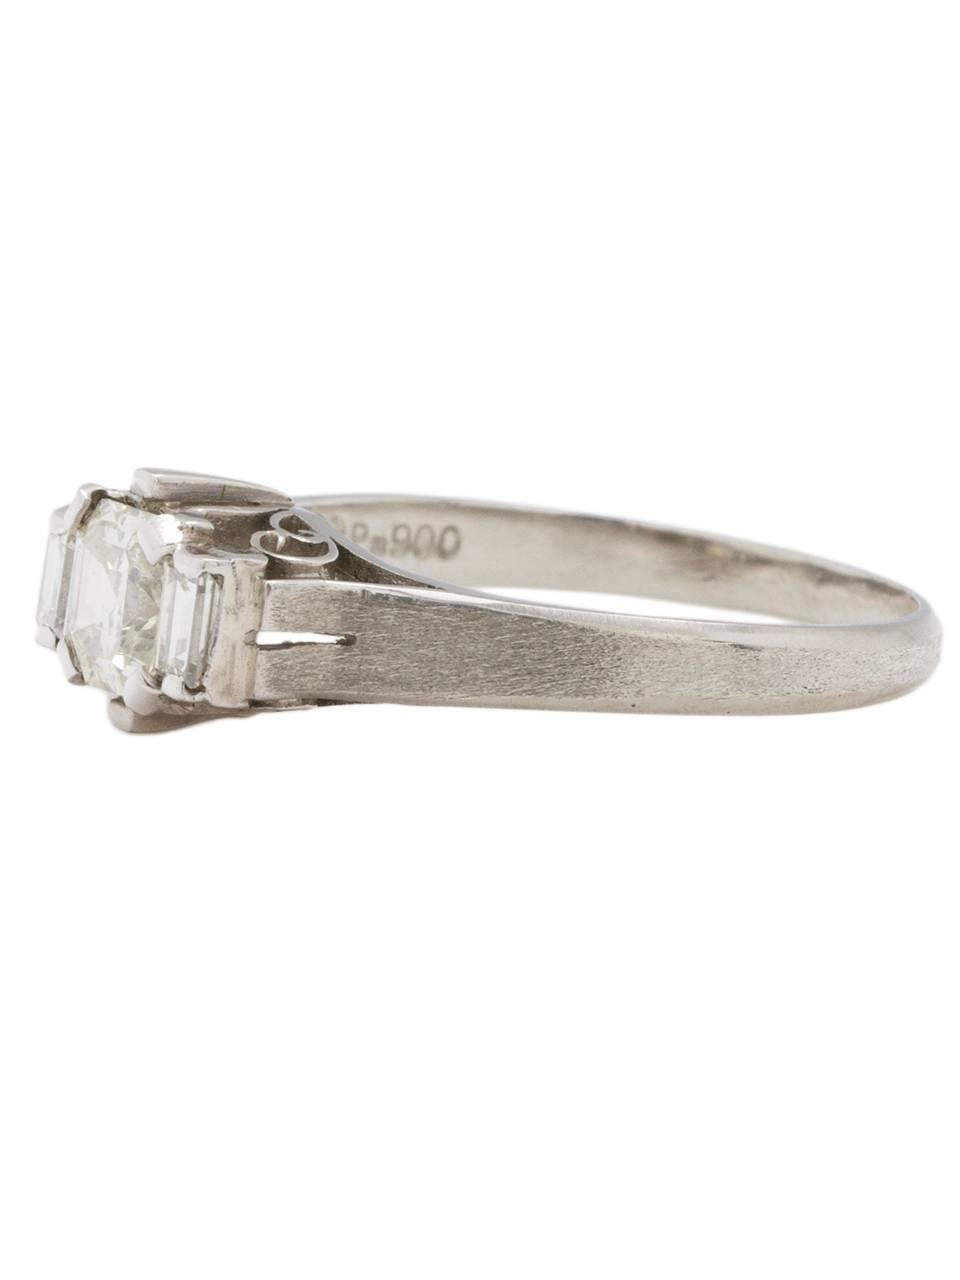 Stunning platinum engagement ring showcasing an EGL certified 0.49 carat Asscher cut diamond, J-SI1. Two perfectly proportioned 0.16 carat matching straight baguette diamond side stones are the perfect accent to the center stone. An elevated and